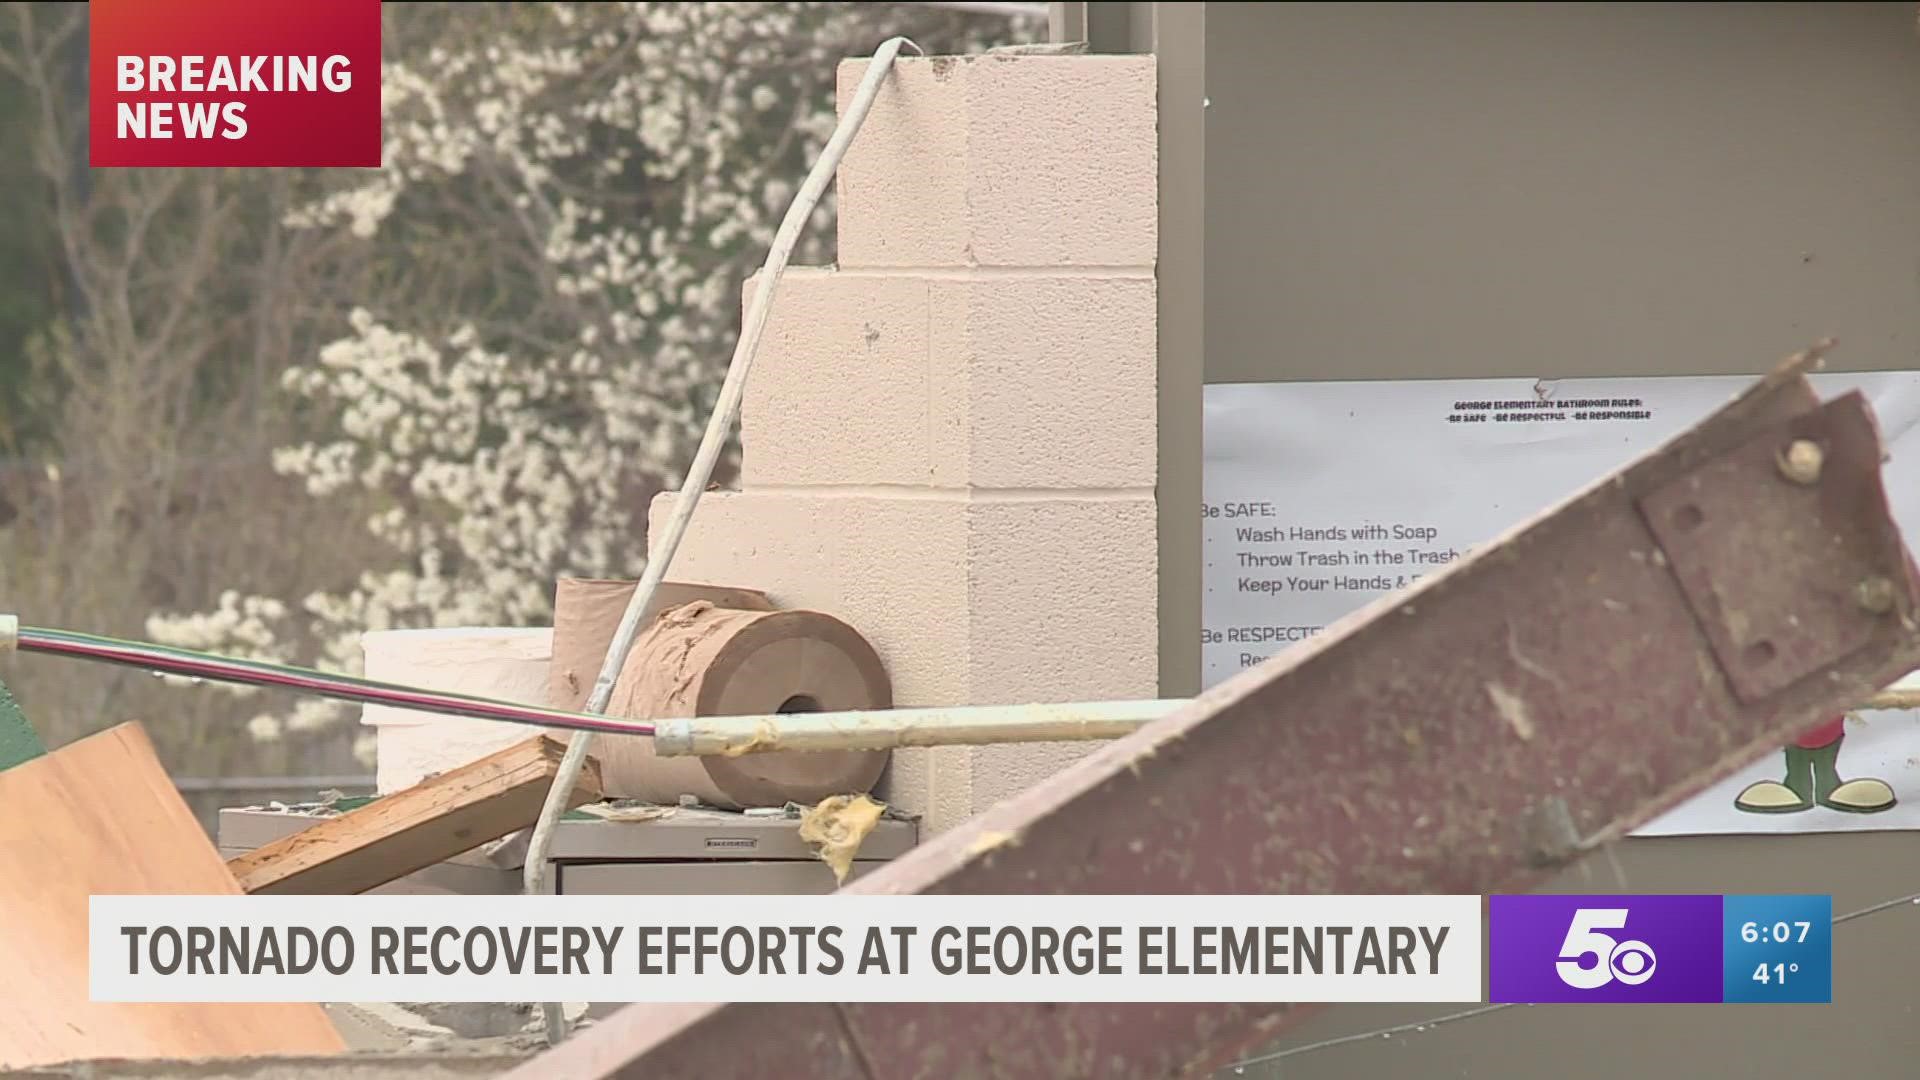 Students and teachers at George Elementary in Springdale, Ark., are back in class just one day after their school was hit by an EF-3 tornado.